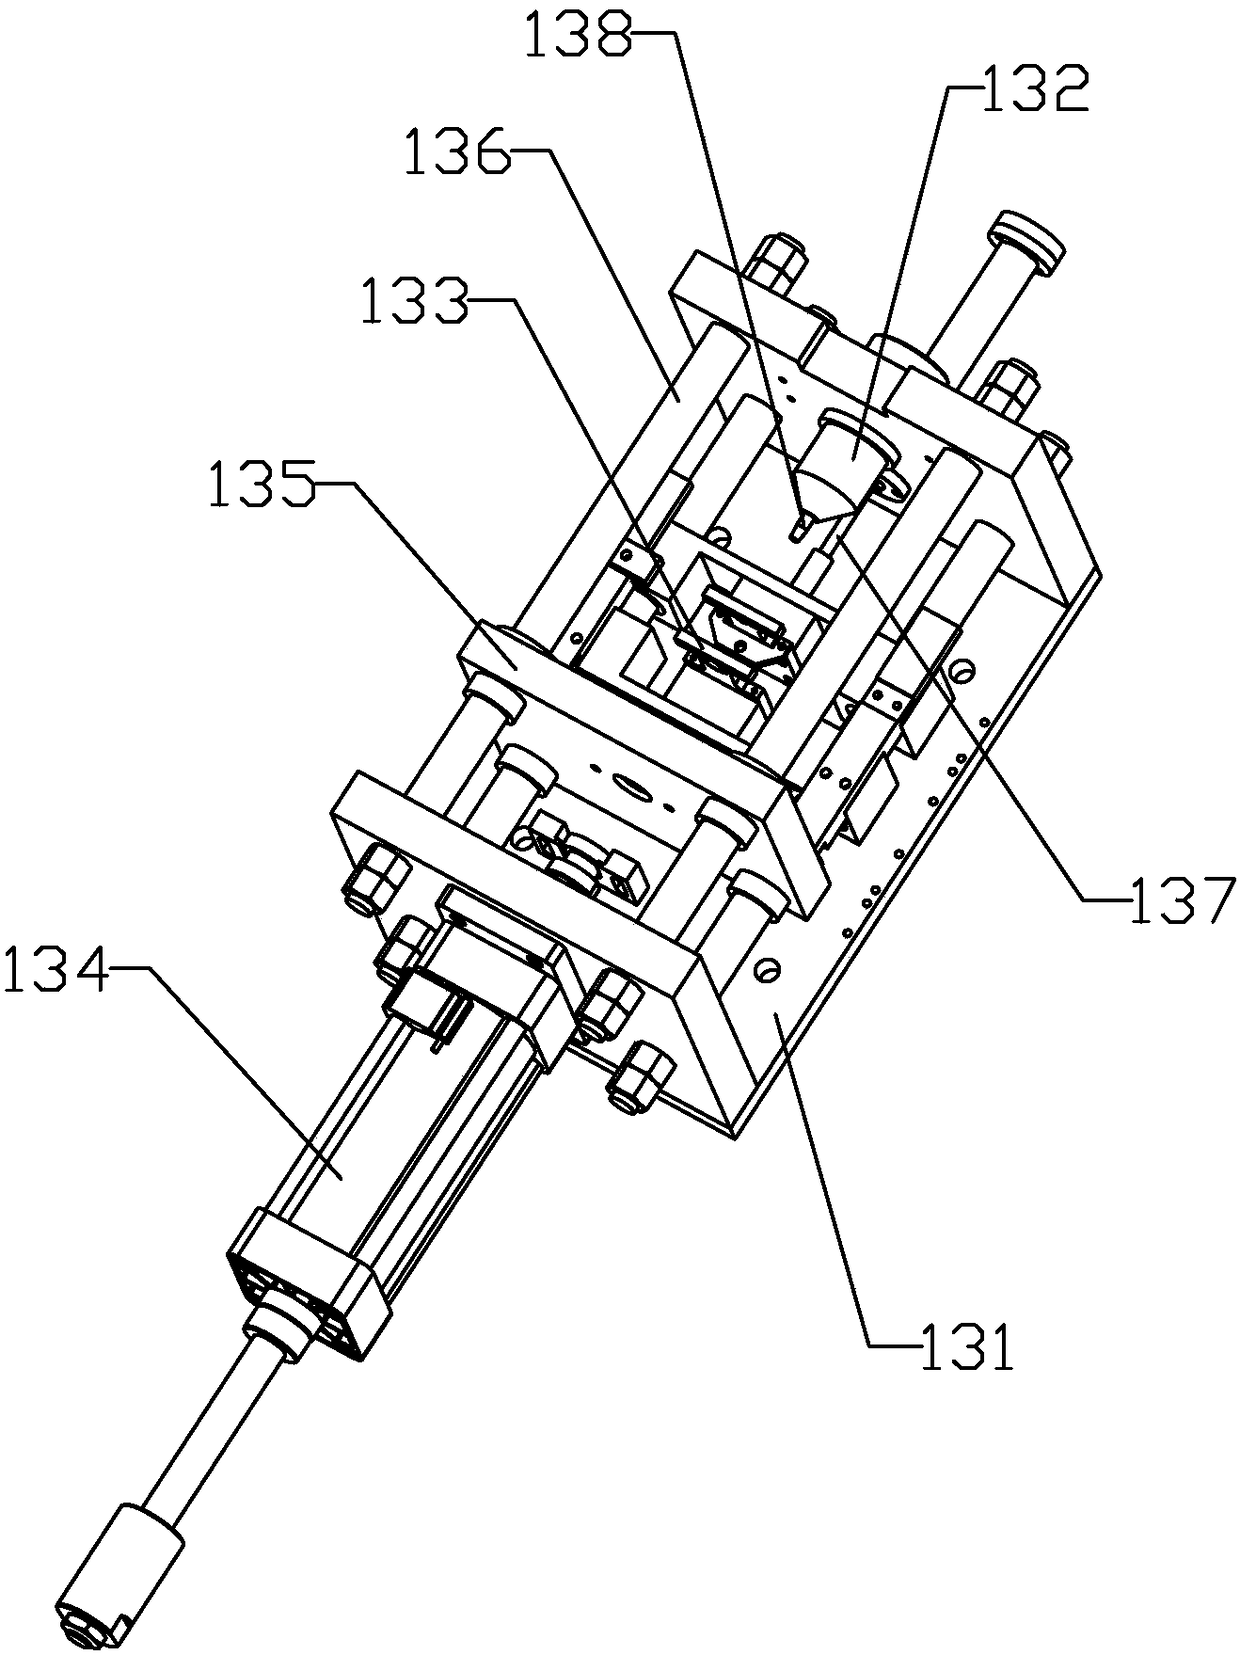 An automatic press-fitting device for motor rotor bearings